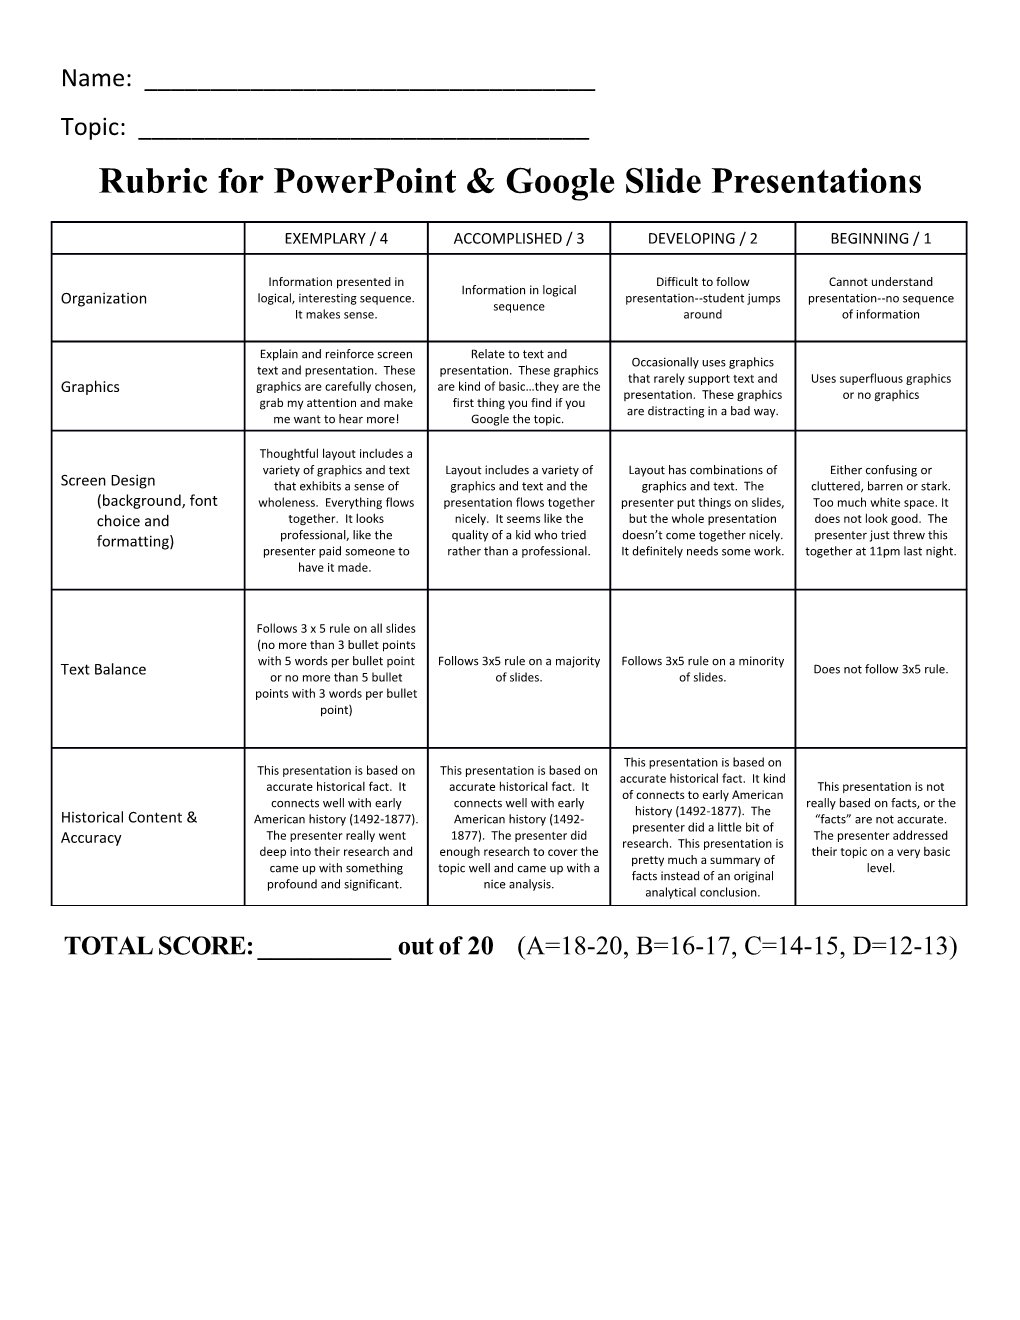 Assessment Rubric for Powerpoint Presentations